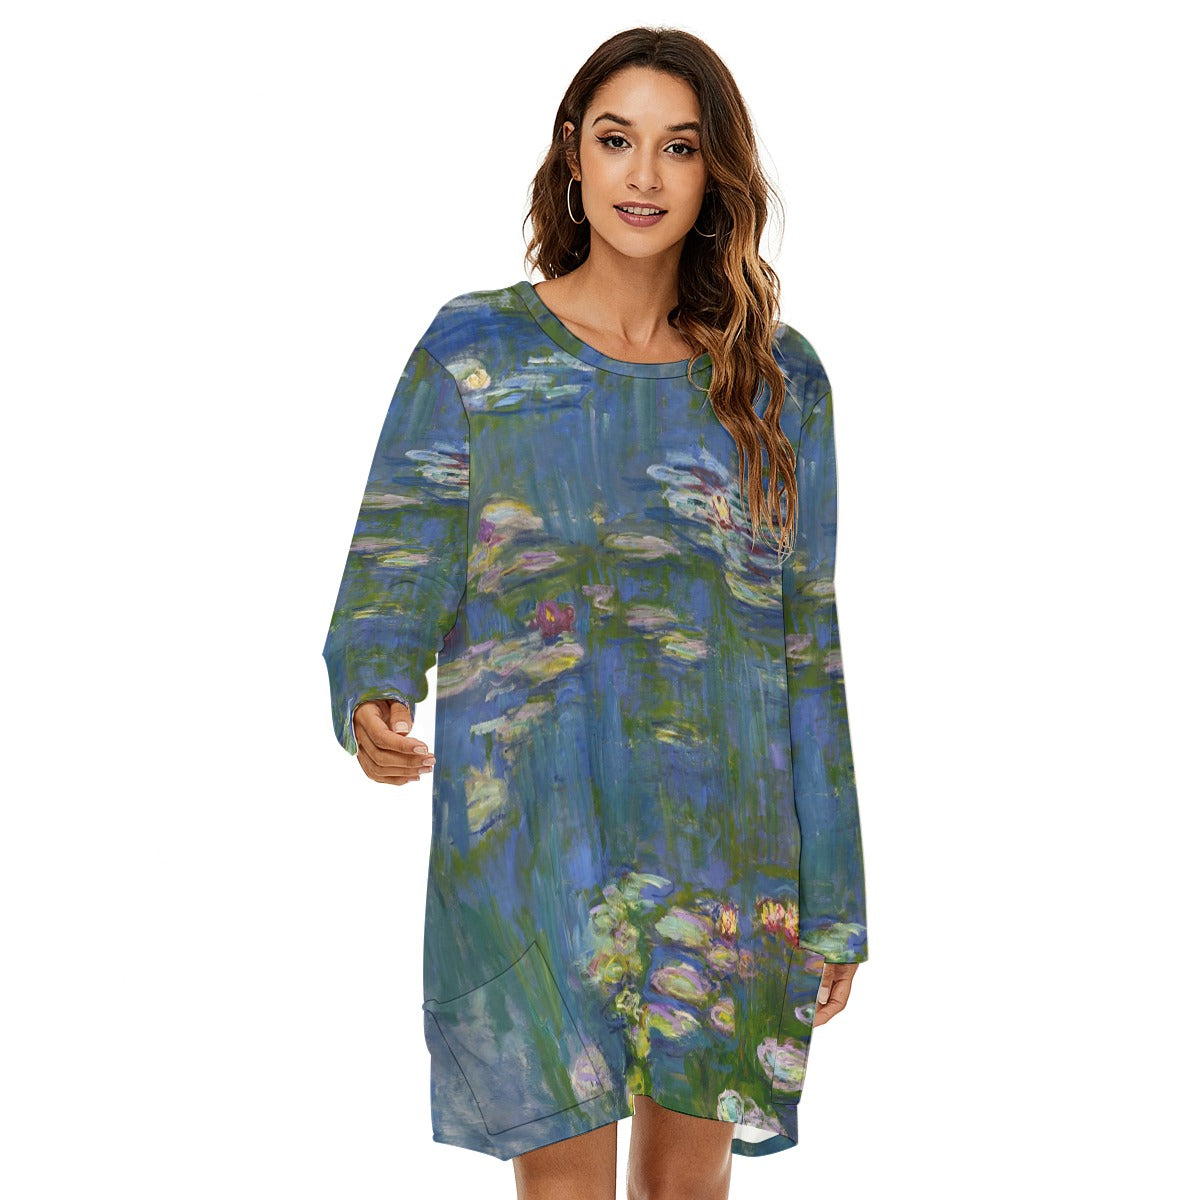 Enchanted Lily Pond Women's Ethereal Dress - Floral Print Fashion